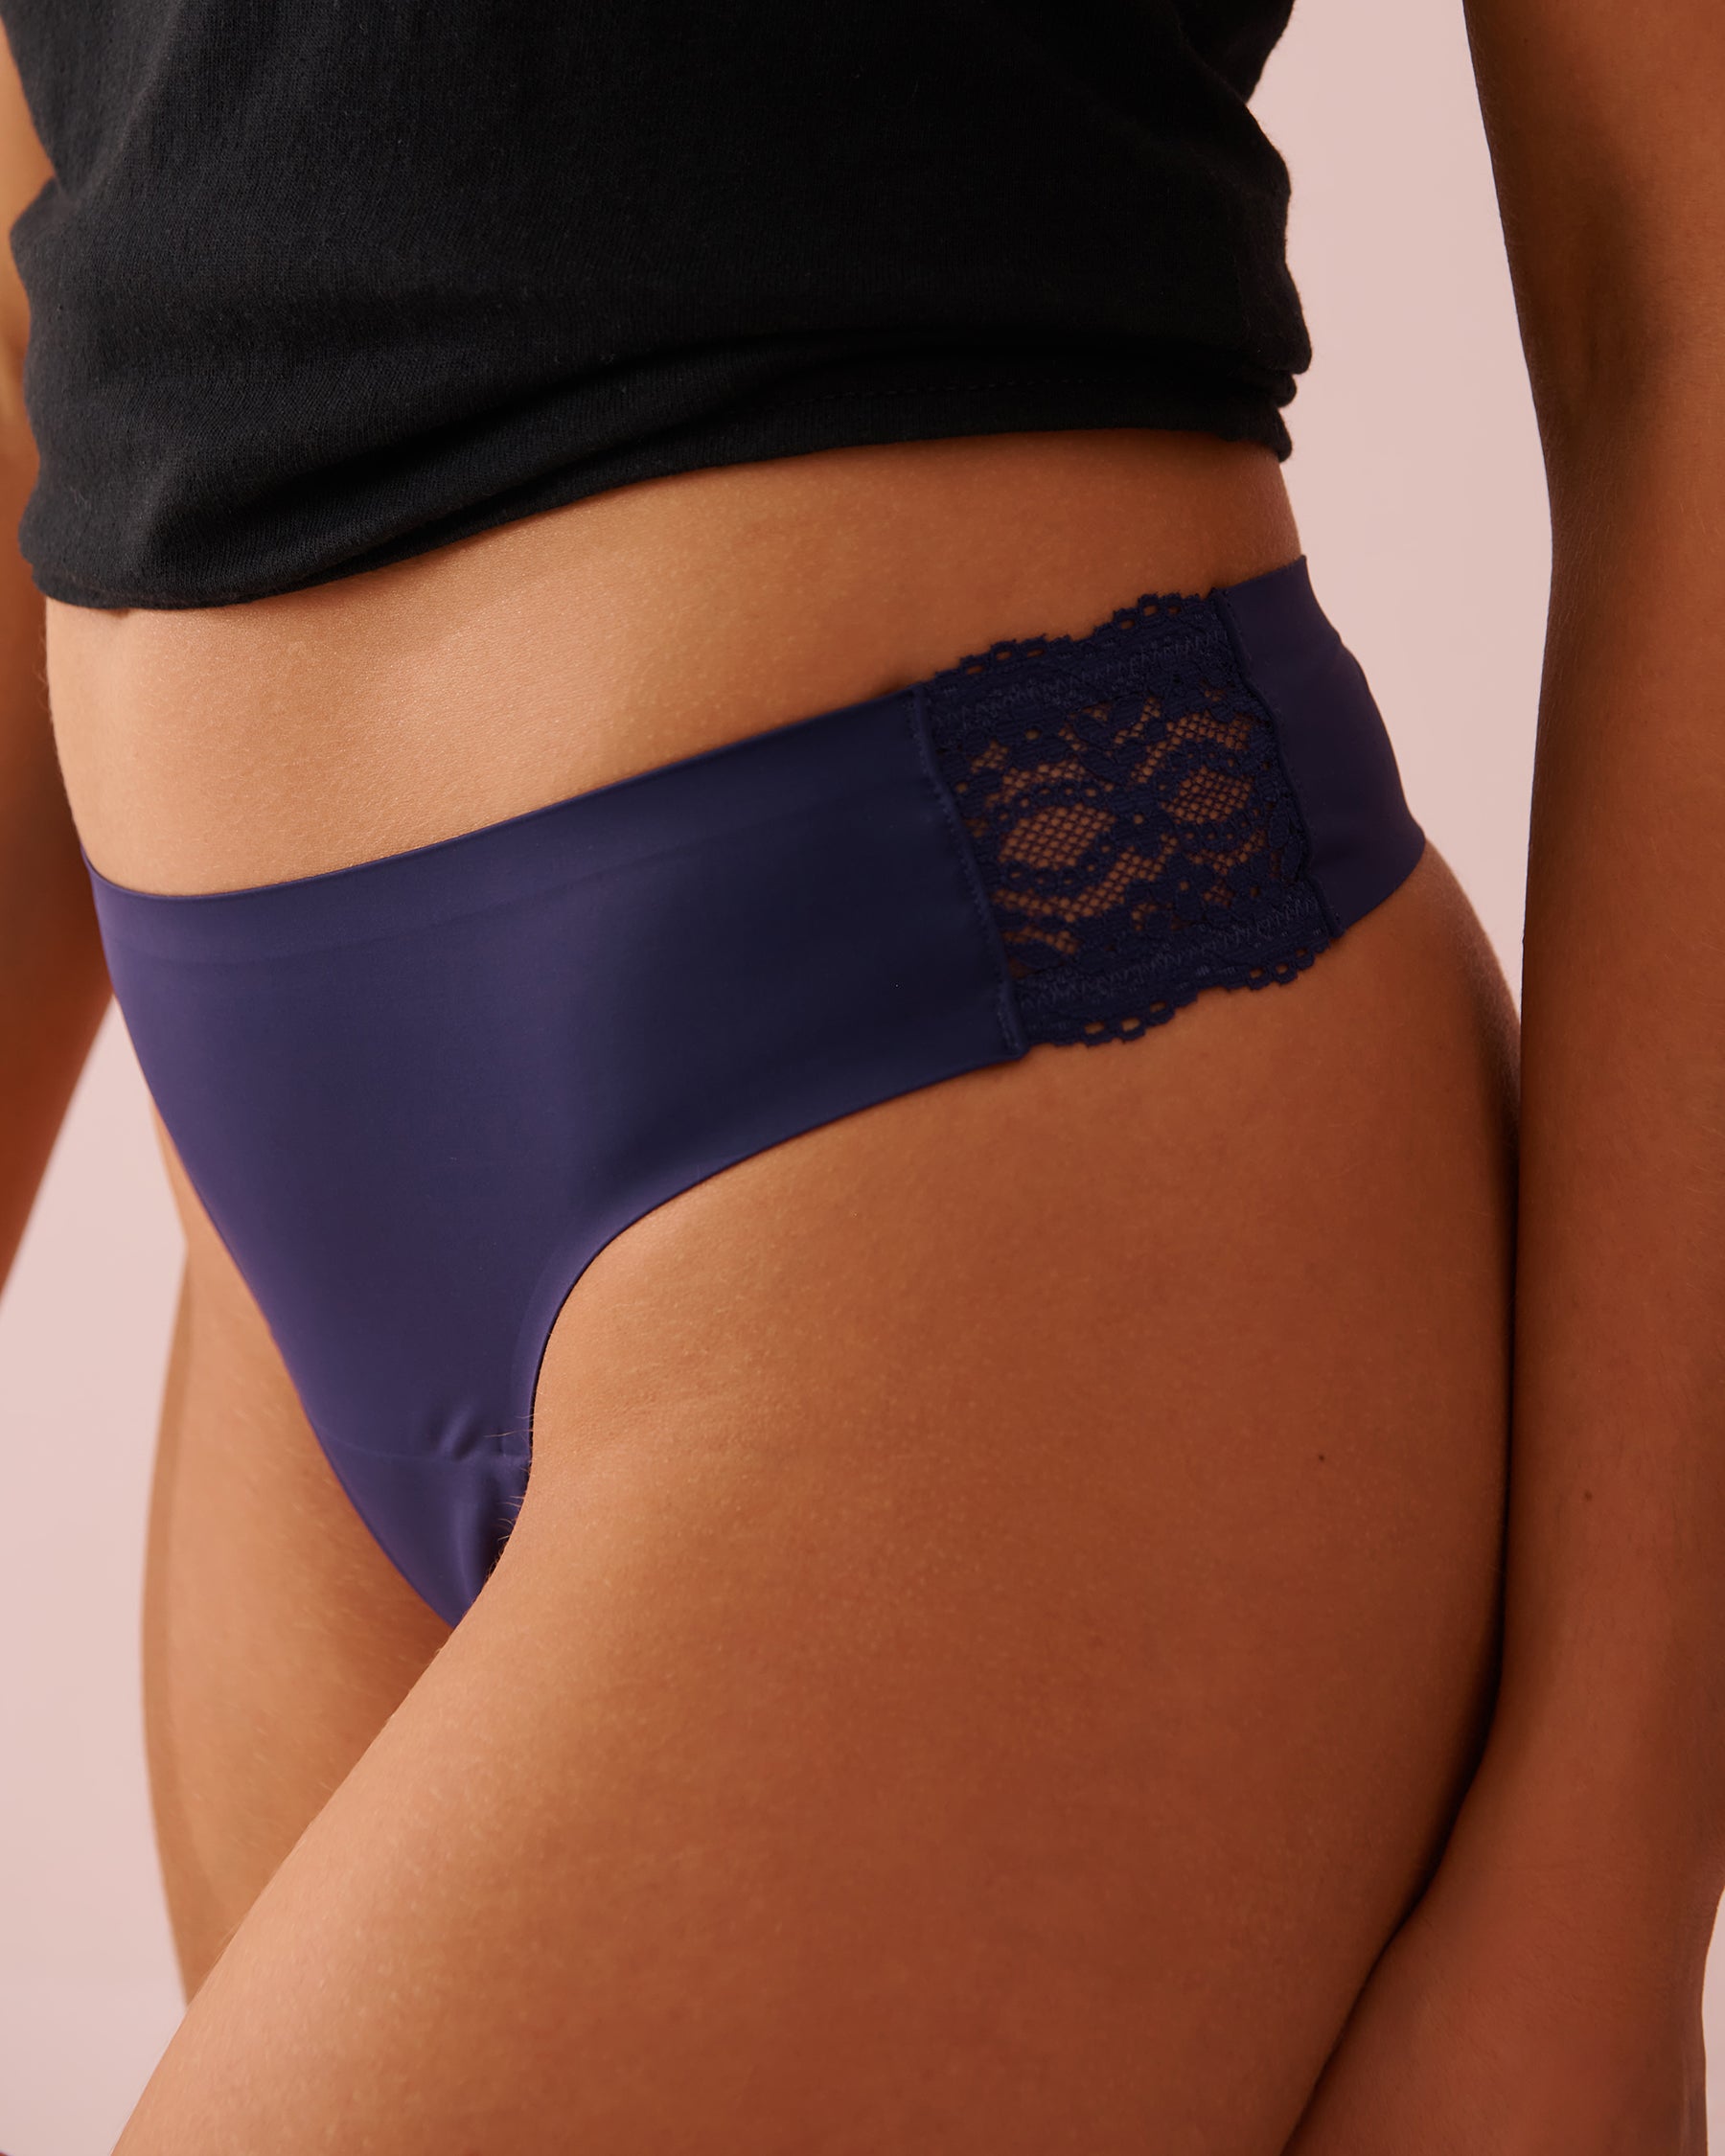 Lace detail of the purple thong period panty – NEWEX